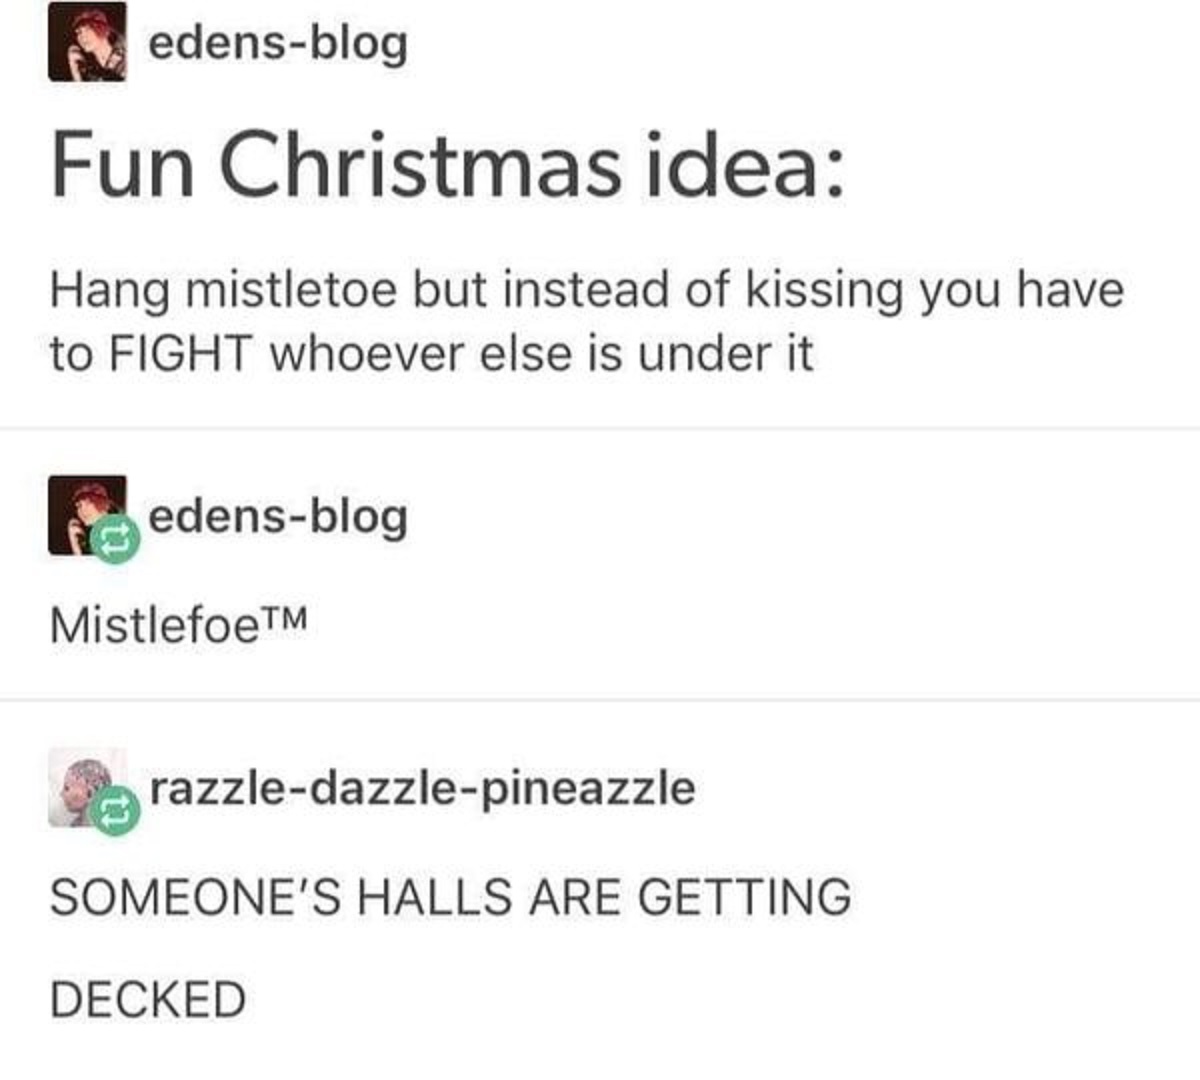 christmas text posts - edensblog Fun Christmas idea Hang mistletoe but instead of kissing you have to Fight whoever else is under edensblog MistlefoeM razzledazzlepineazzle Someone'S Halls Are Getting Decked